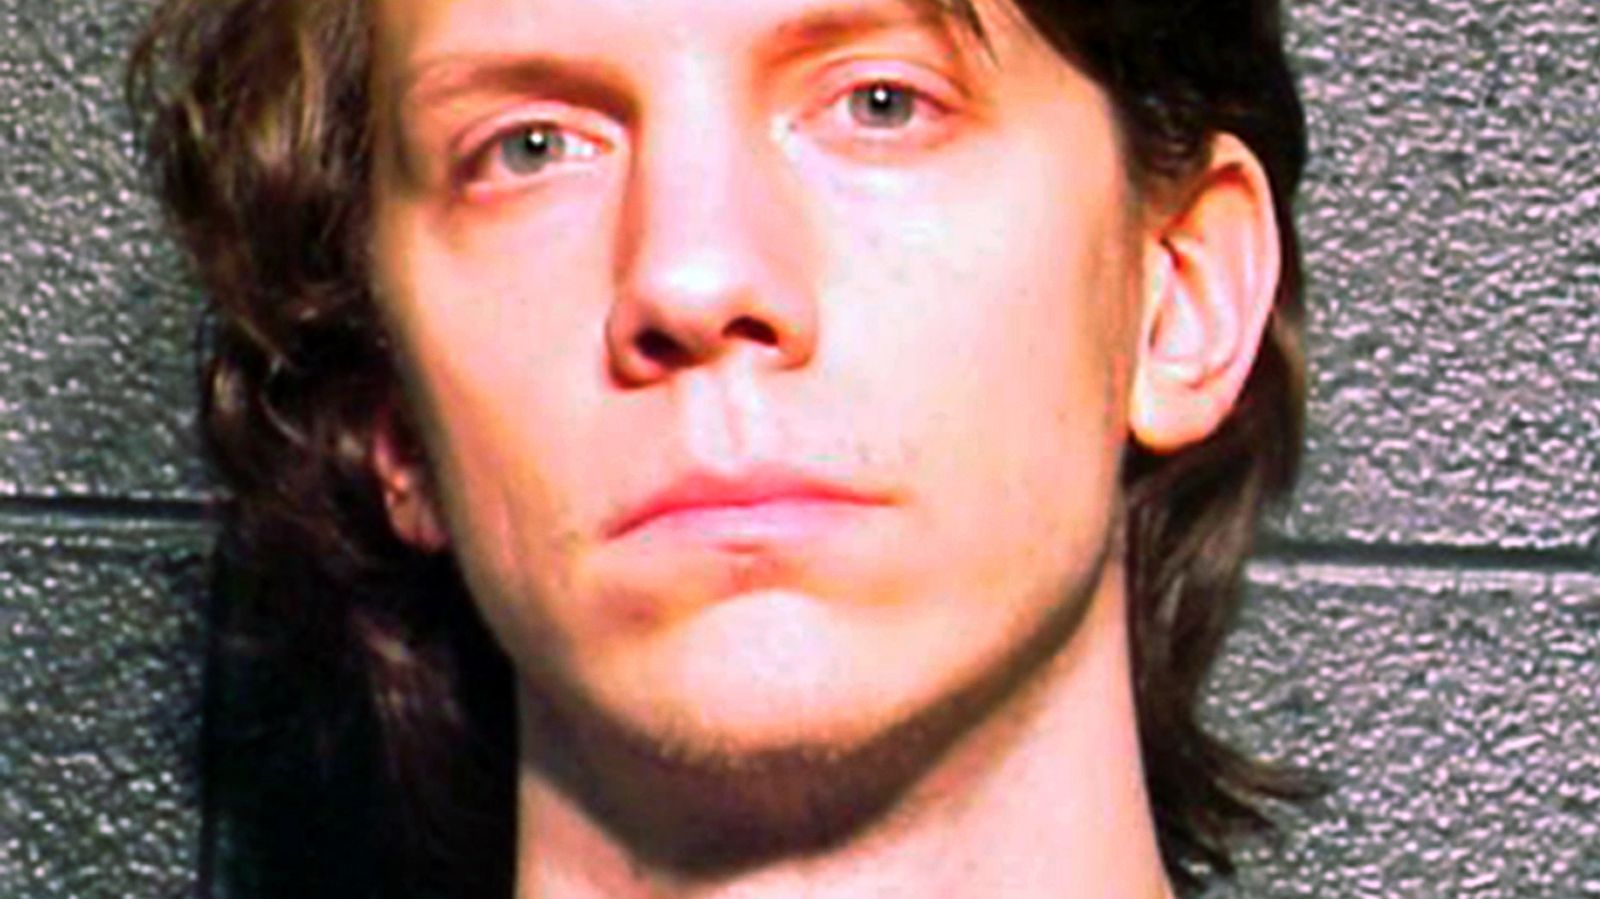 FBI Most Wanted Hacker Jeremy Hammond Used His Cat's Name for